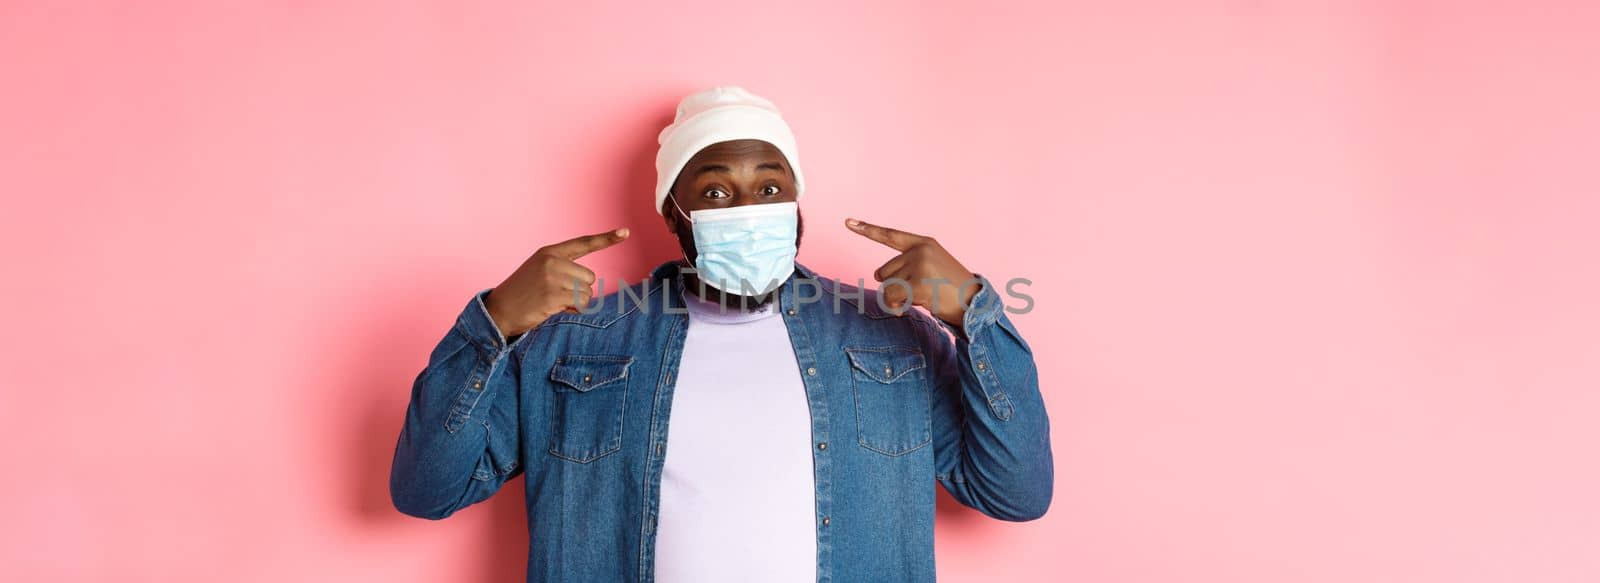 Coronavirus, lifestyle and social distancing concept. Happy Black man in beanie pointing at his face mask, smiling at camera, standing over pink background.